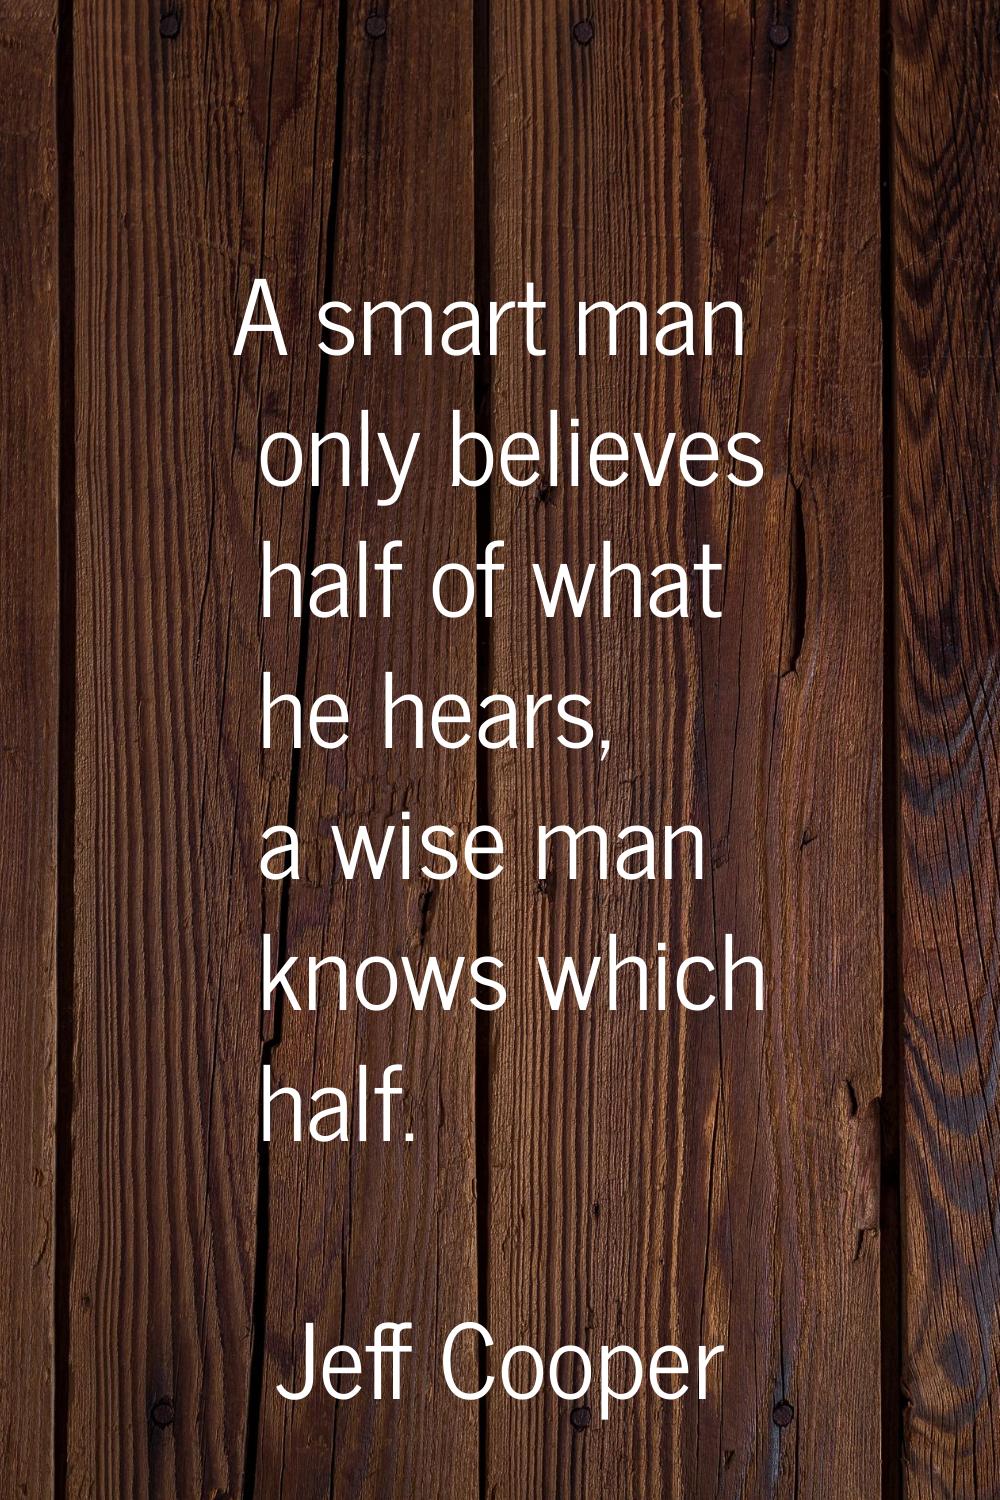 A smart man only believes half of what he hears, a wise man knows which half.